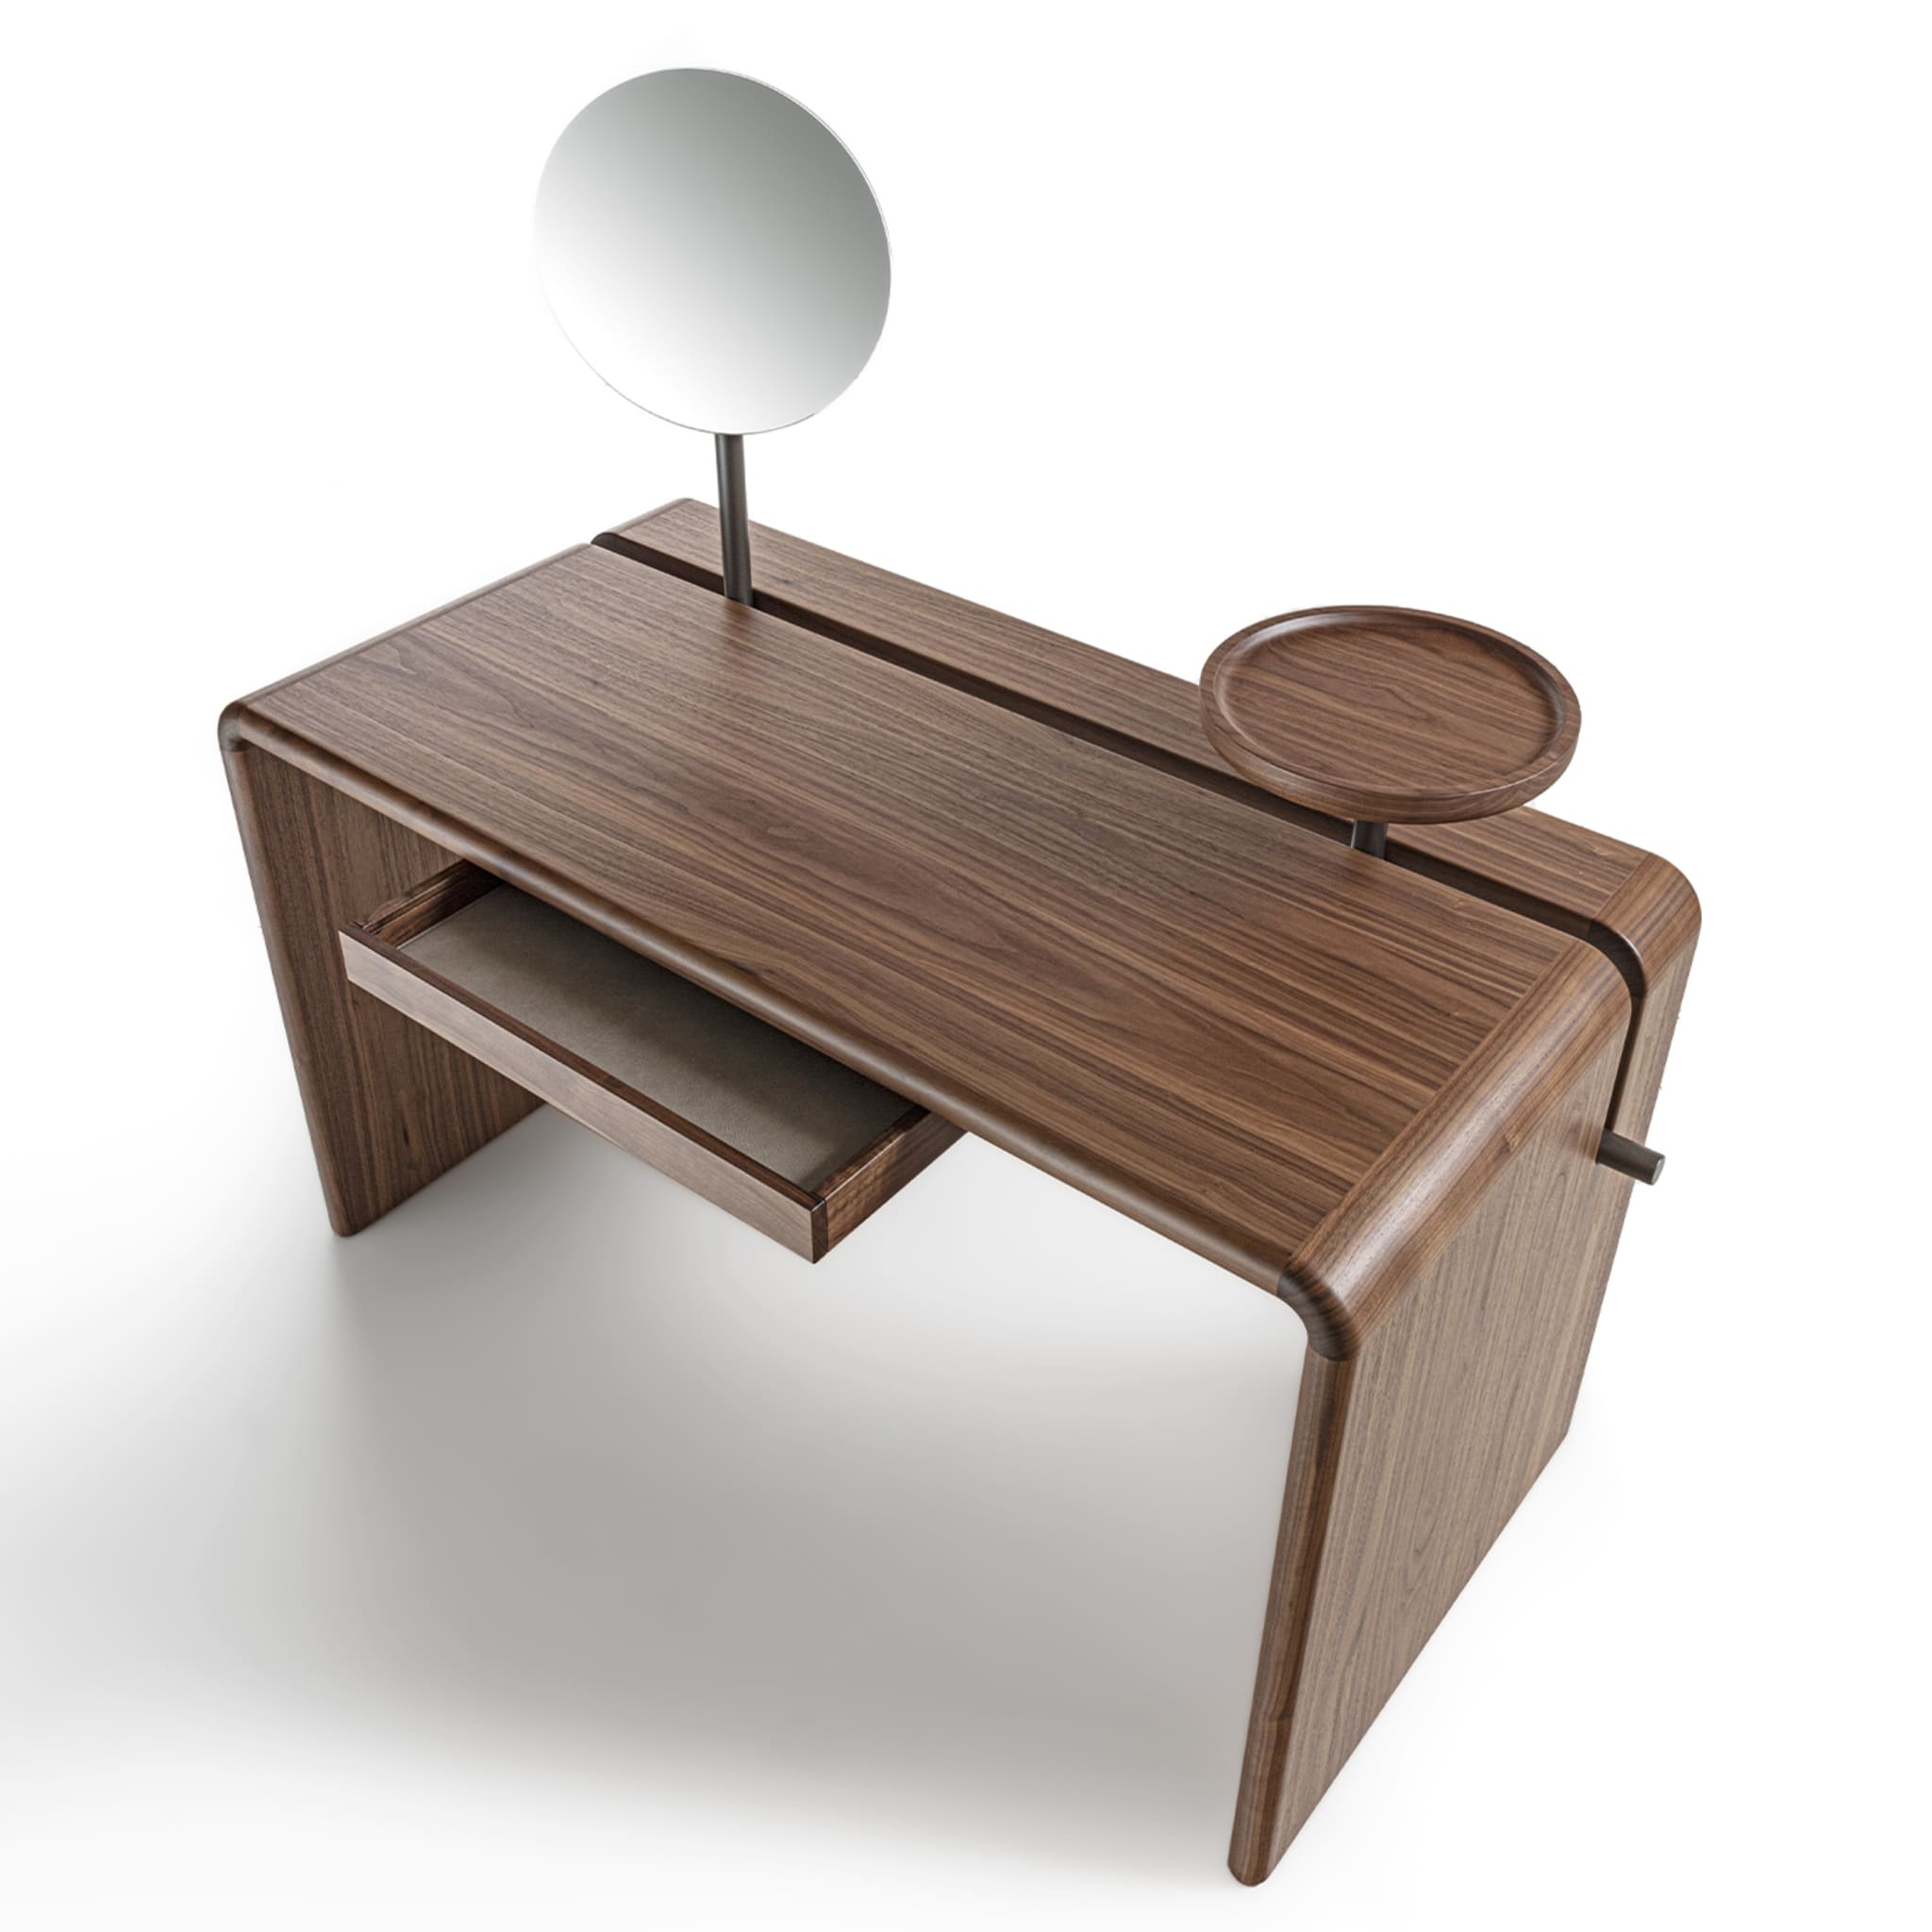 Butter Canaletto Vanity Desk with Mirror - Alternative view 2